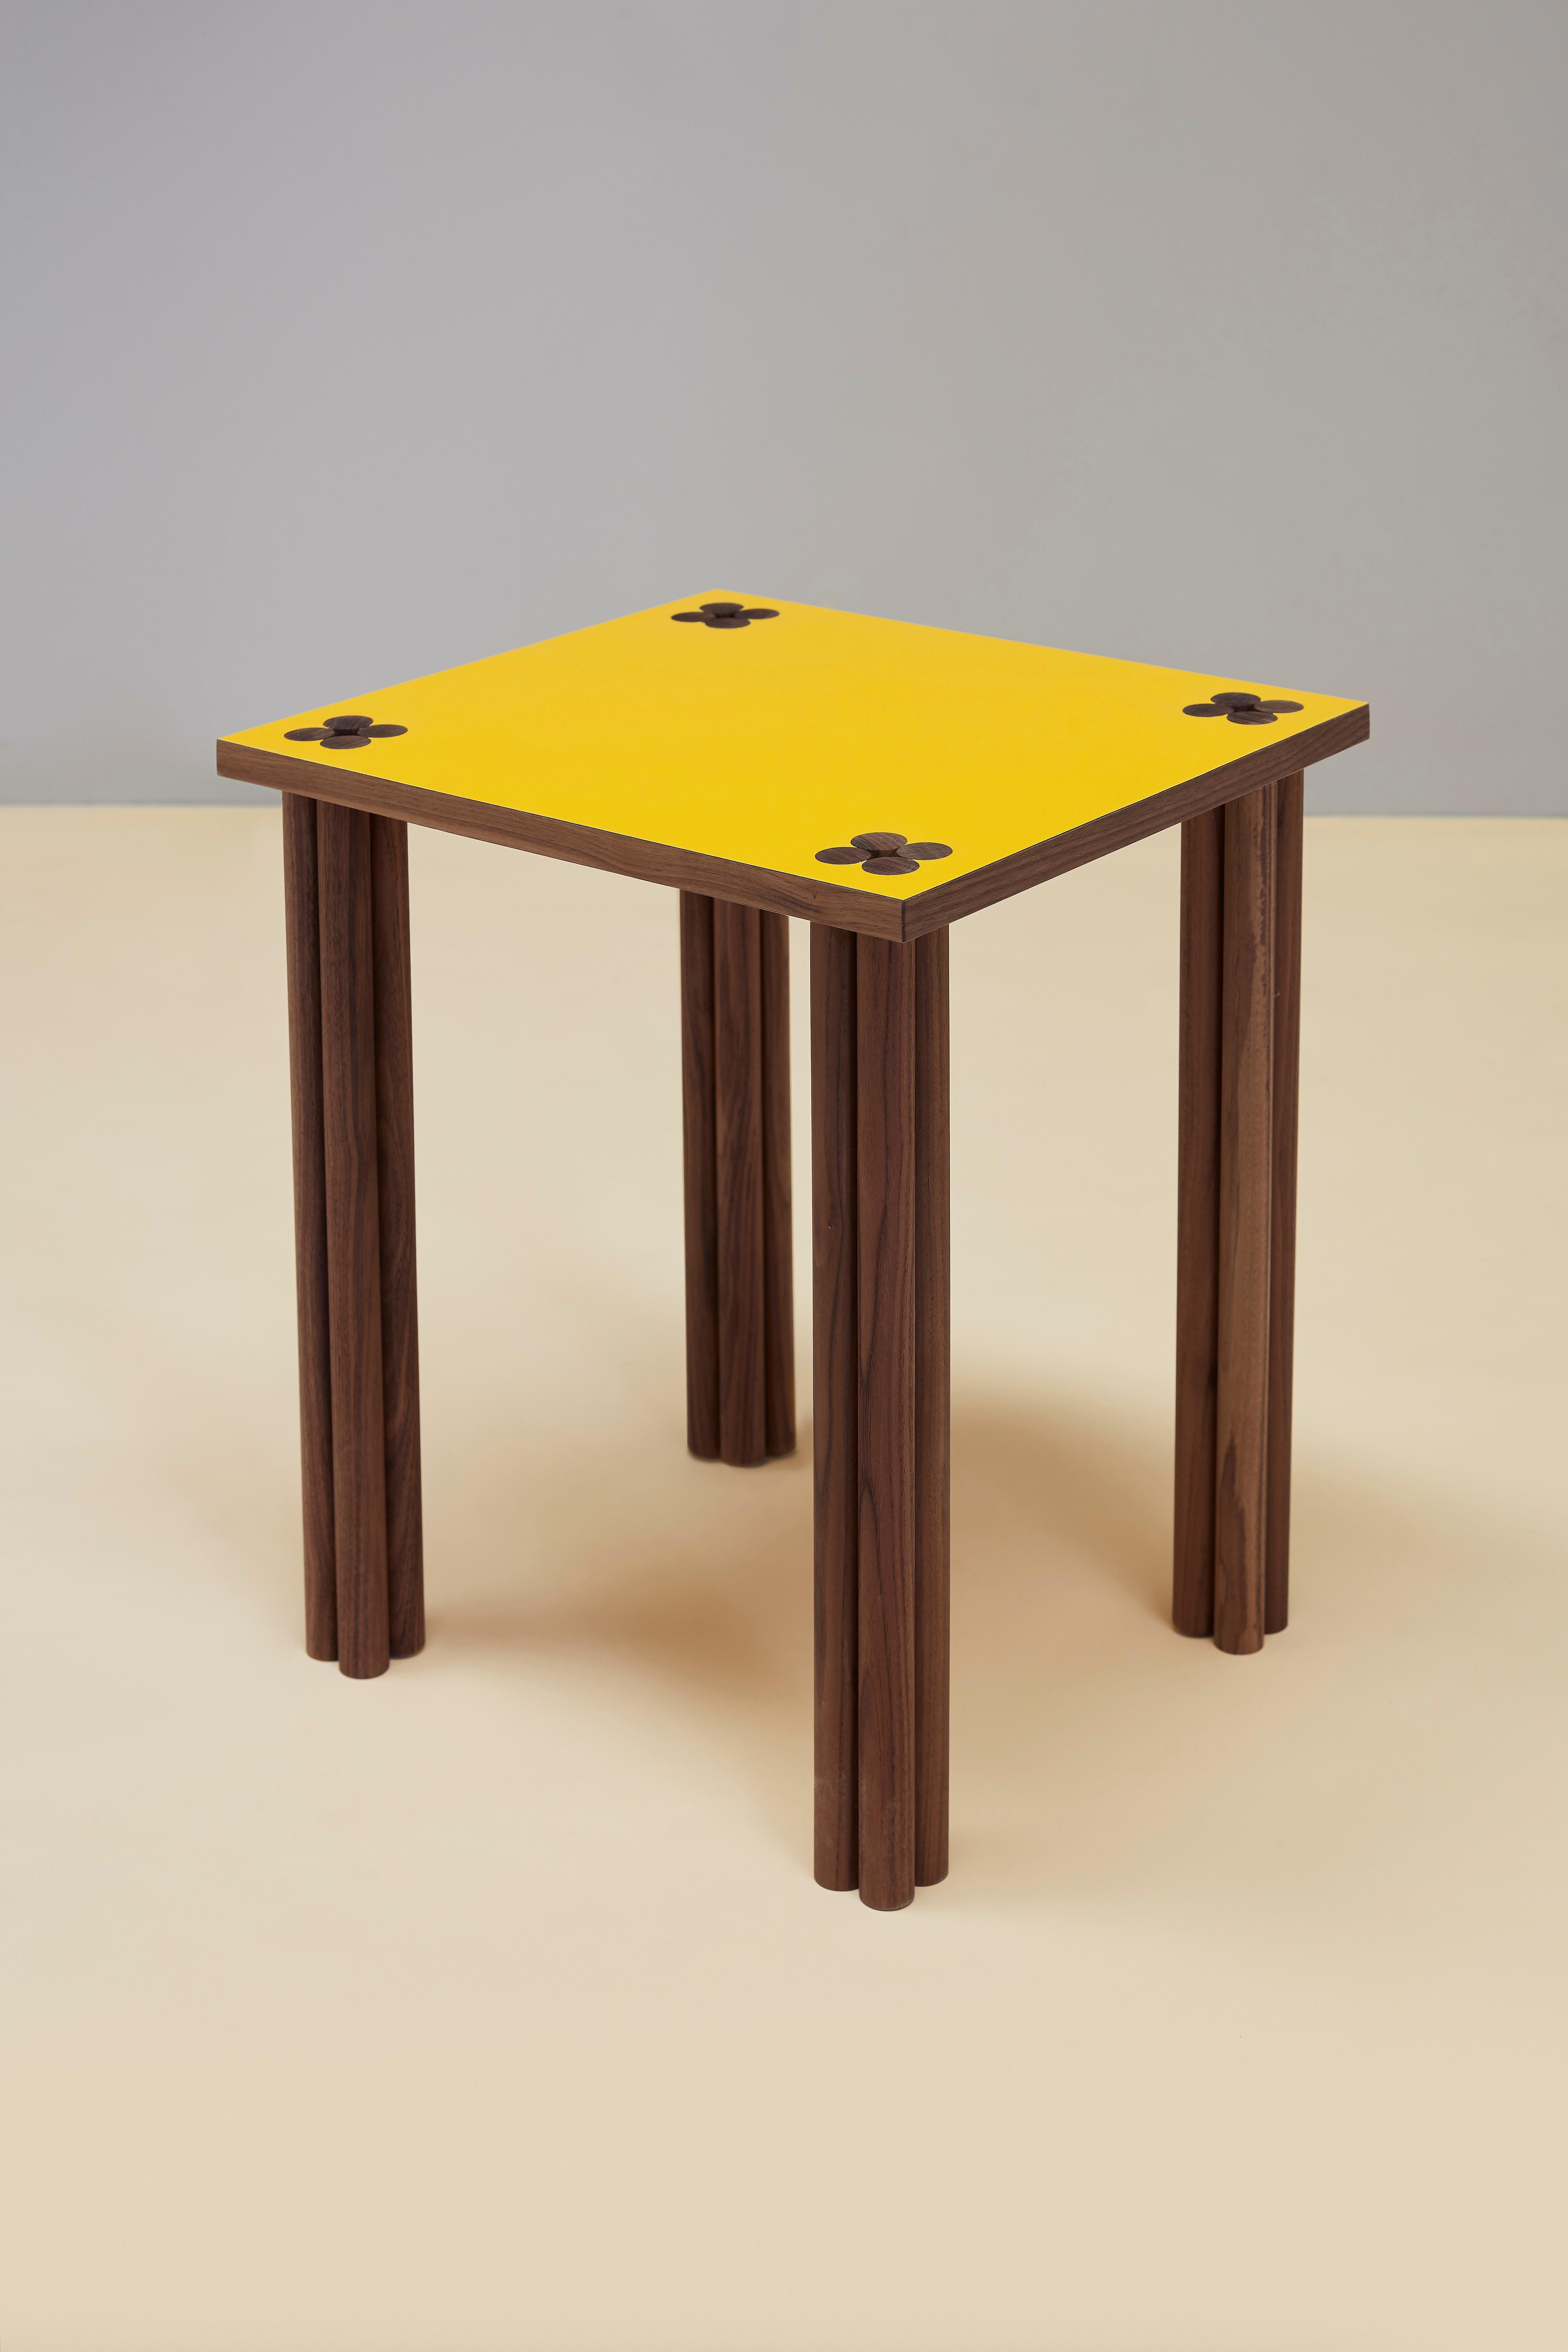 Yellow & walnut Hana side table.
Dimensions: D 38 x W 43 x H 50 cm
Materials: solid walnut wood, walnut veneer, Formica
Oak or other wood possible. 

Hana is Japanese and means flower - it is a collection of side tables and a sideboard. The name